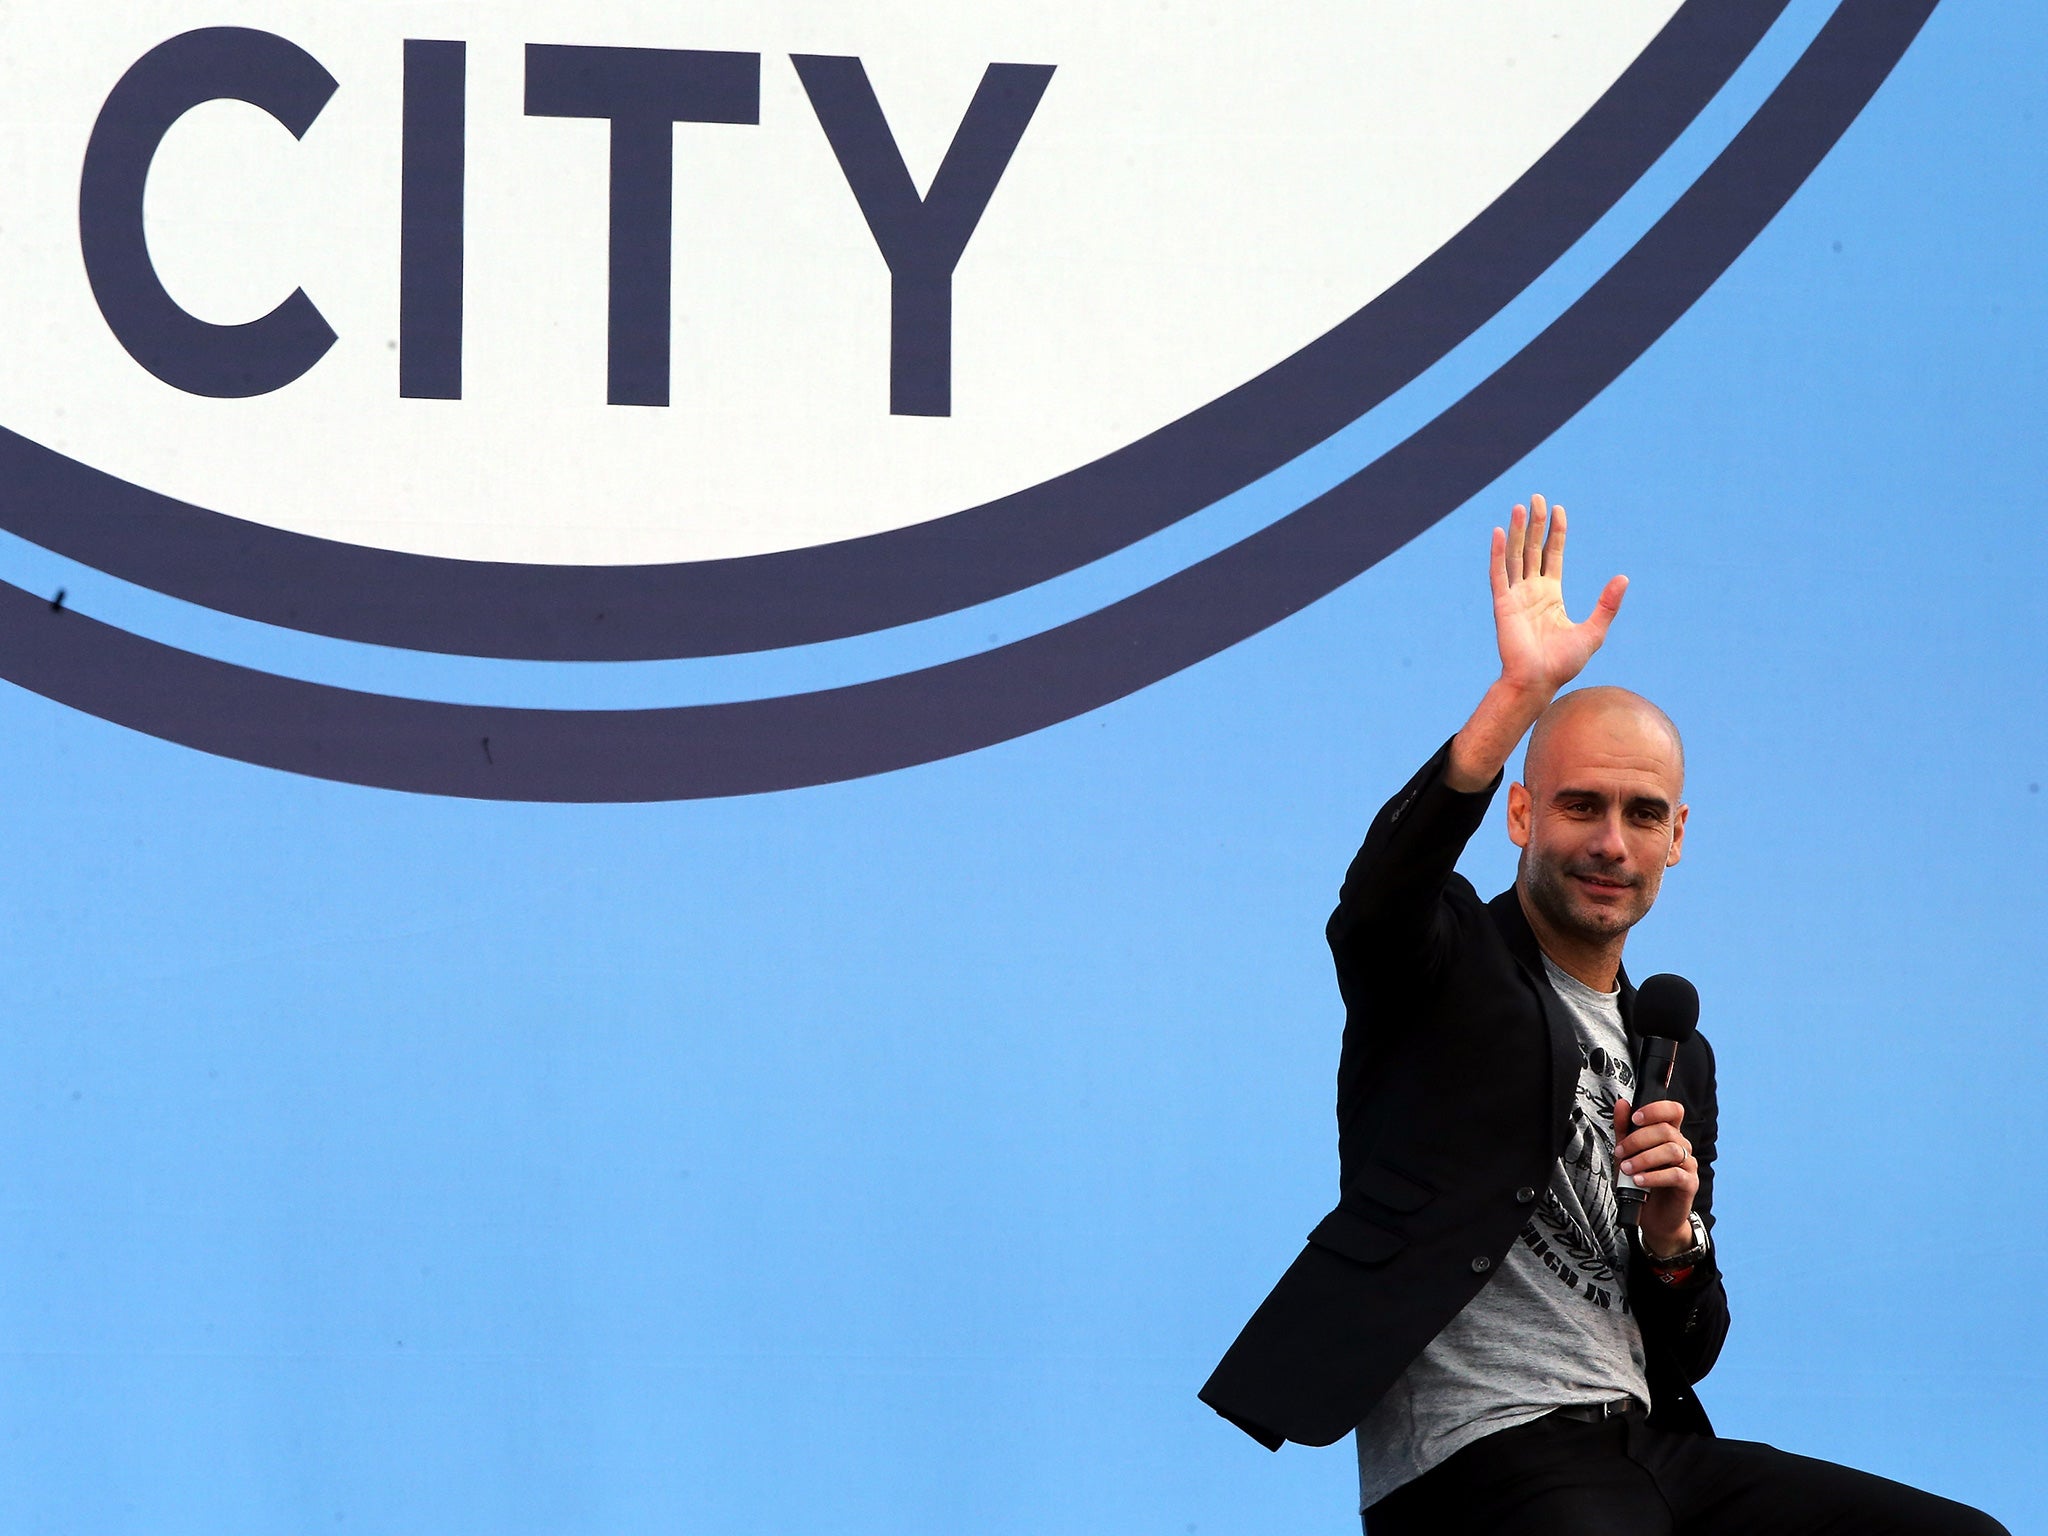 Guardiola was unveiled in front of City's supporters on Sunday